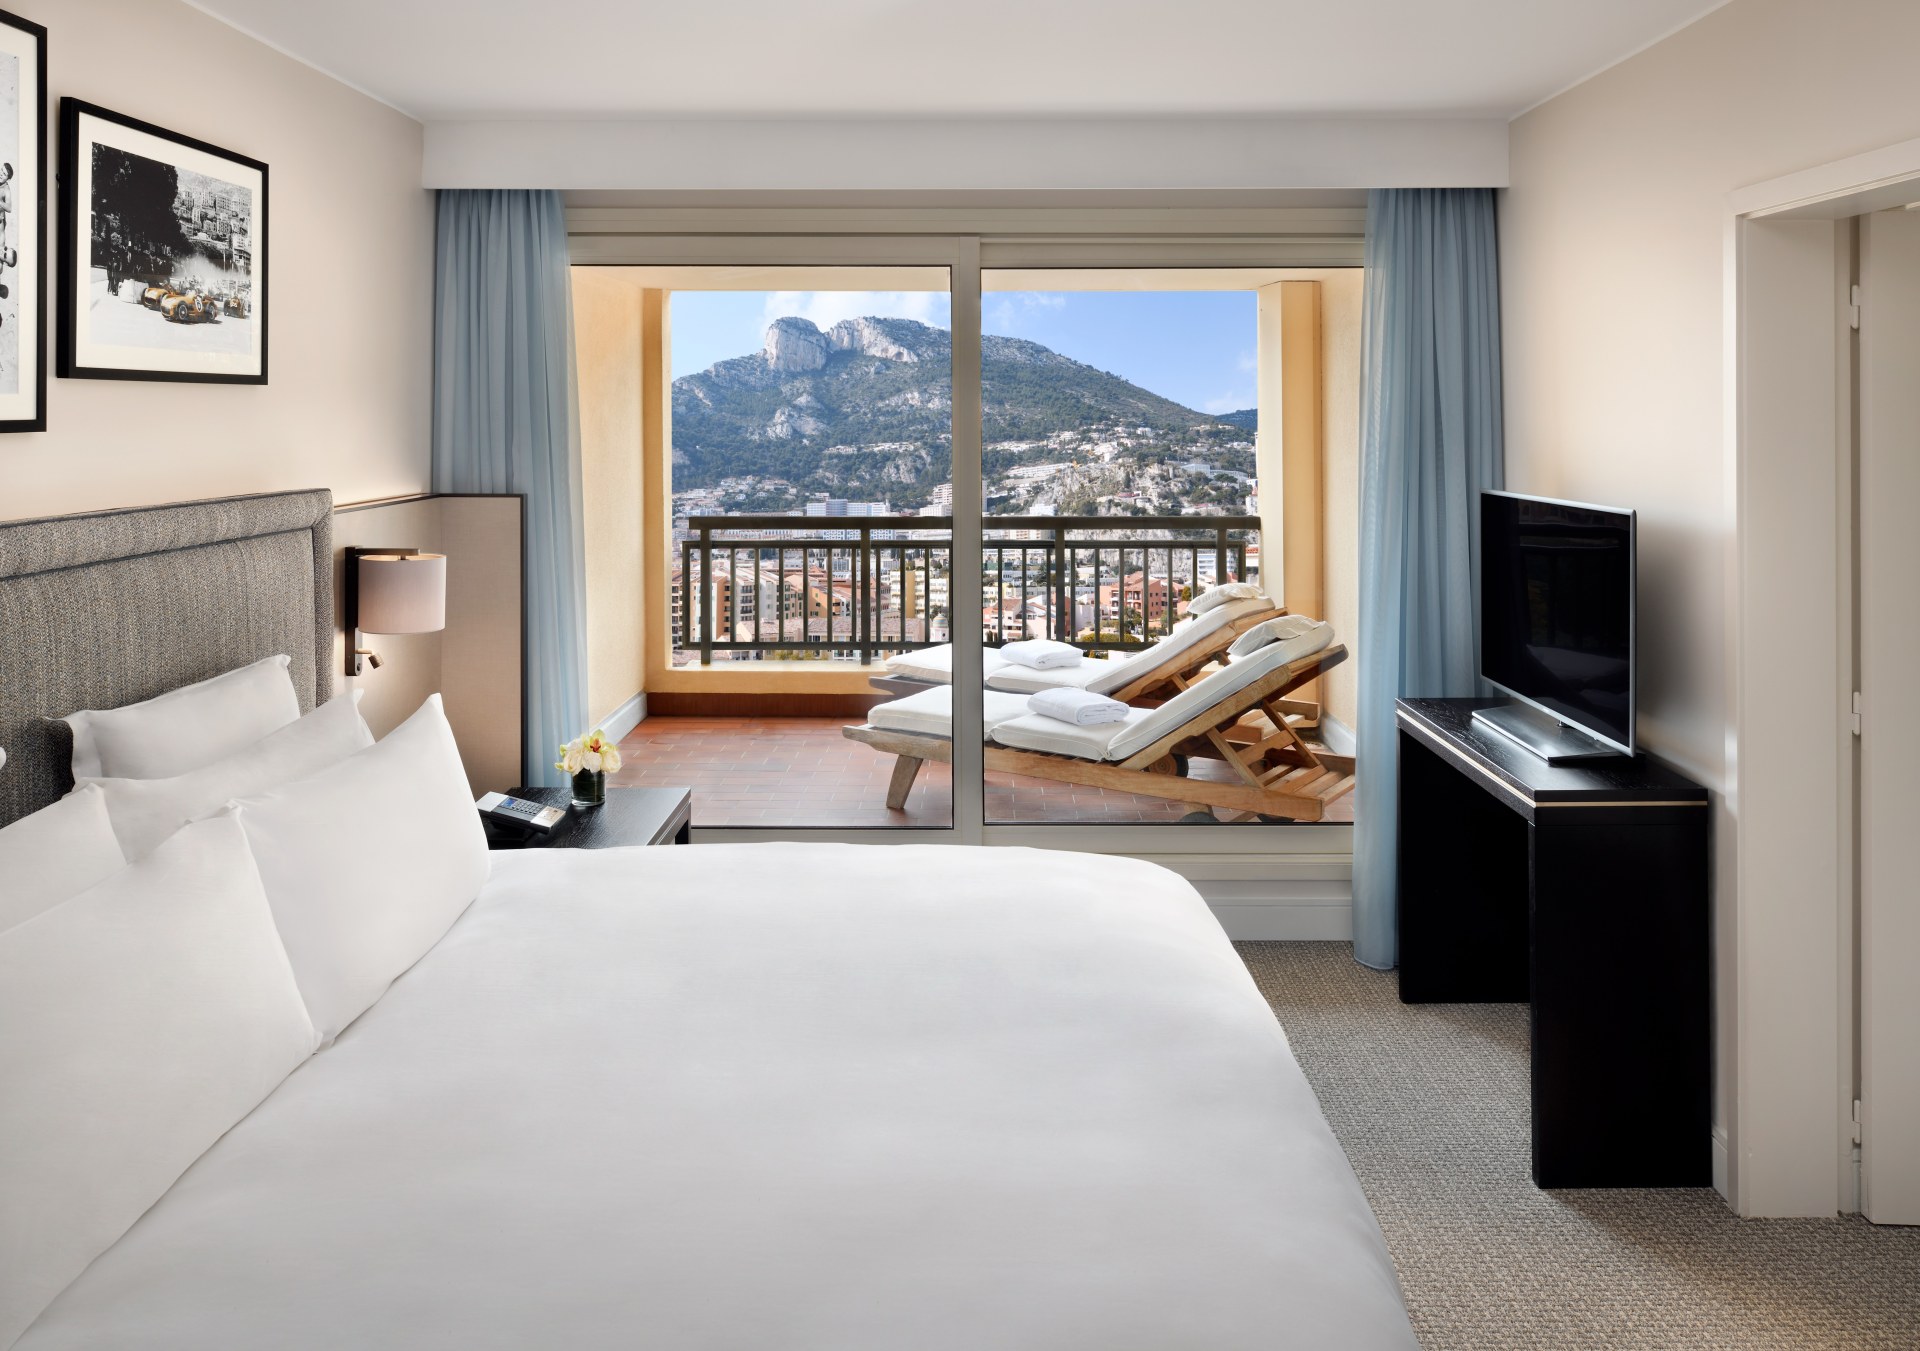 Columbus Hotel Monte-Carlo, Curio Collection by Hilton - Guest Room